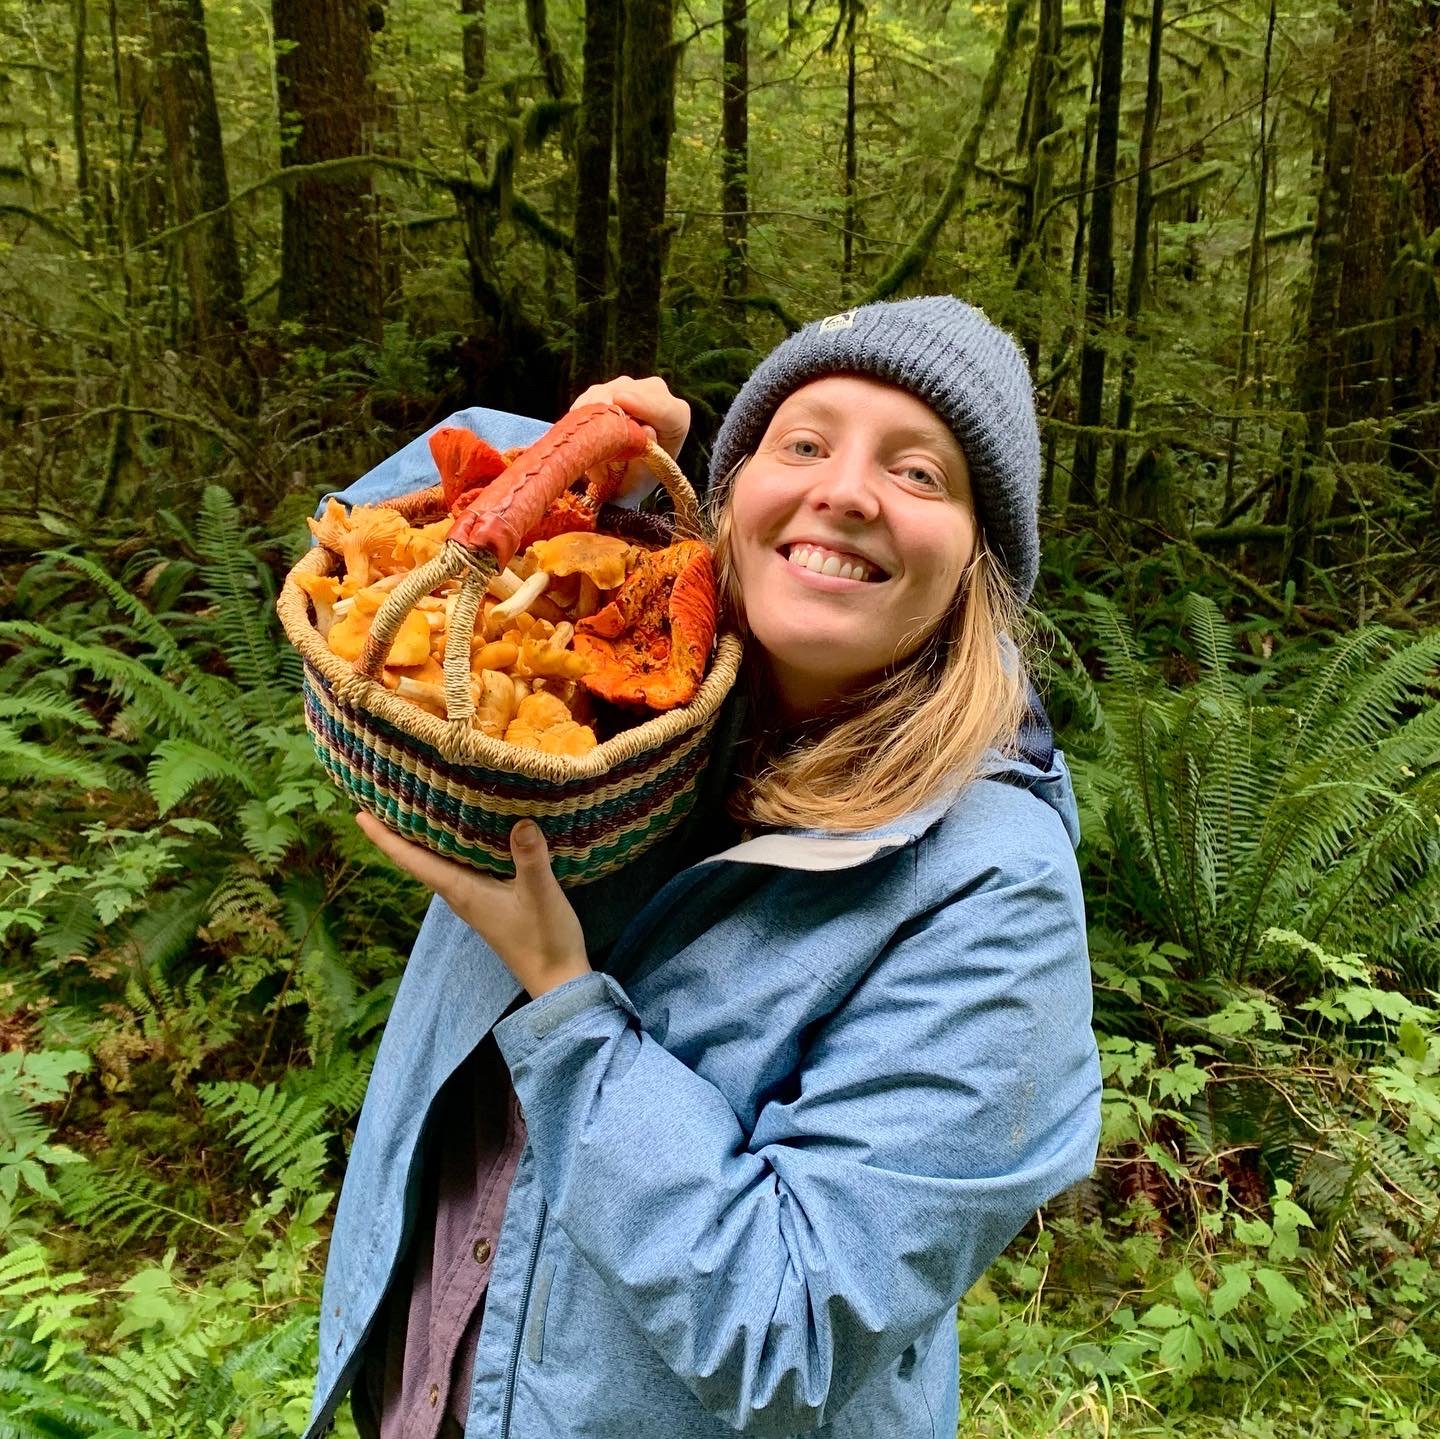 Stefanie smiling with a basket of mushrooms in a foest